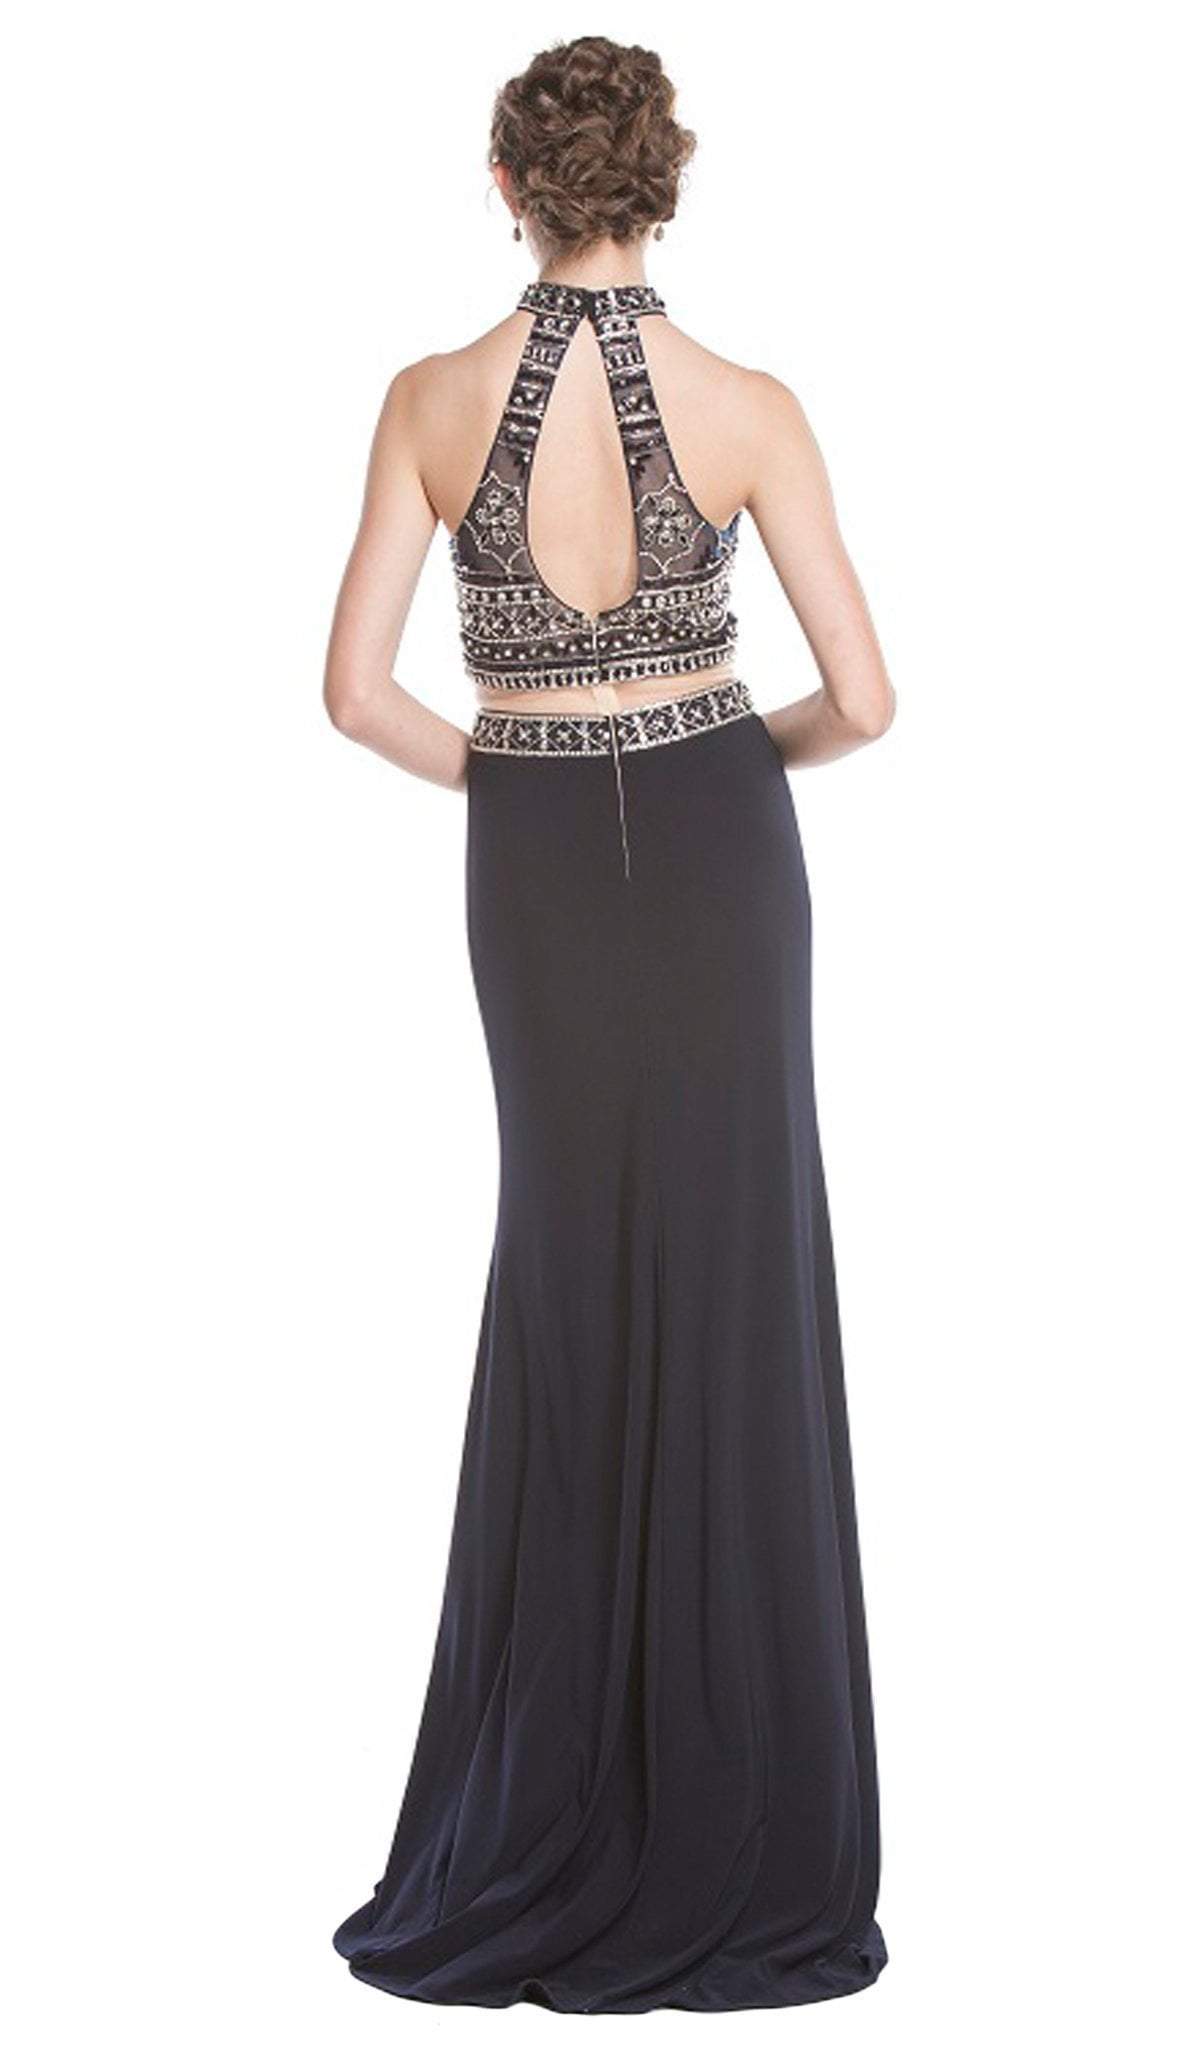 Two Piece Beaded High Halter Evening Gown Dress